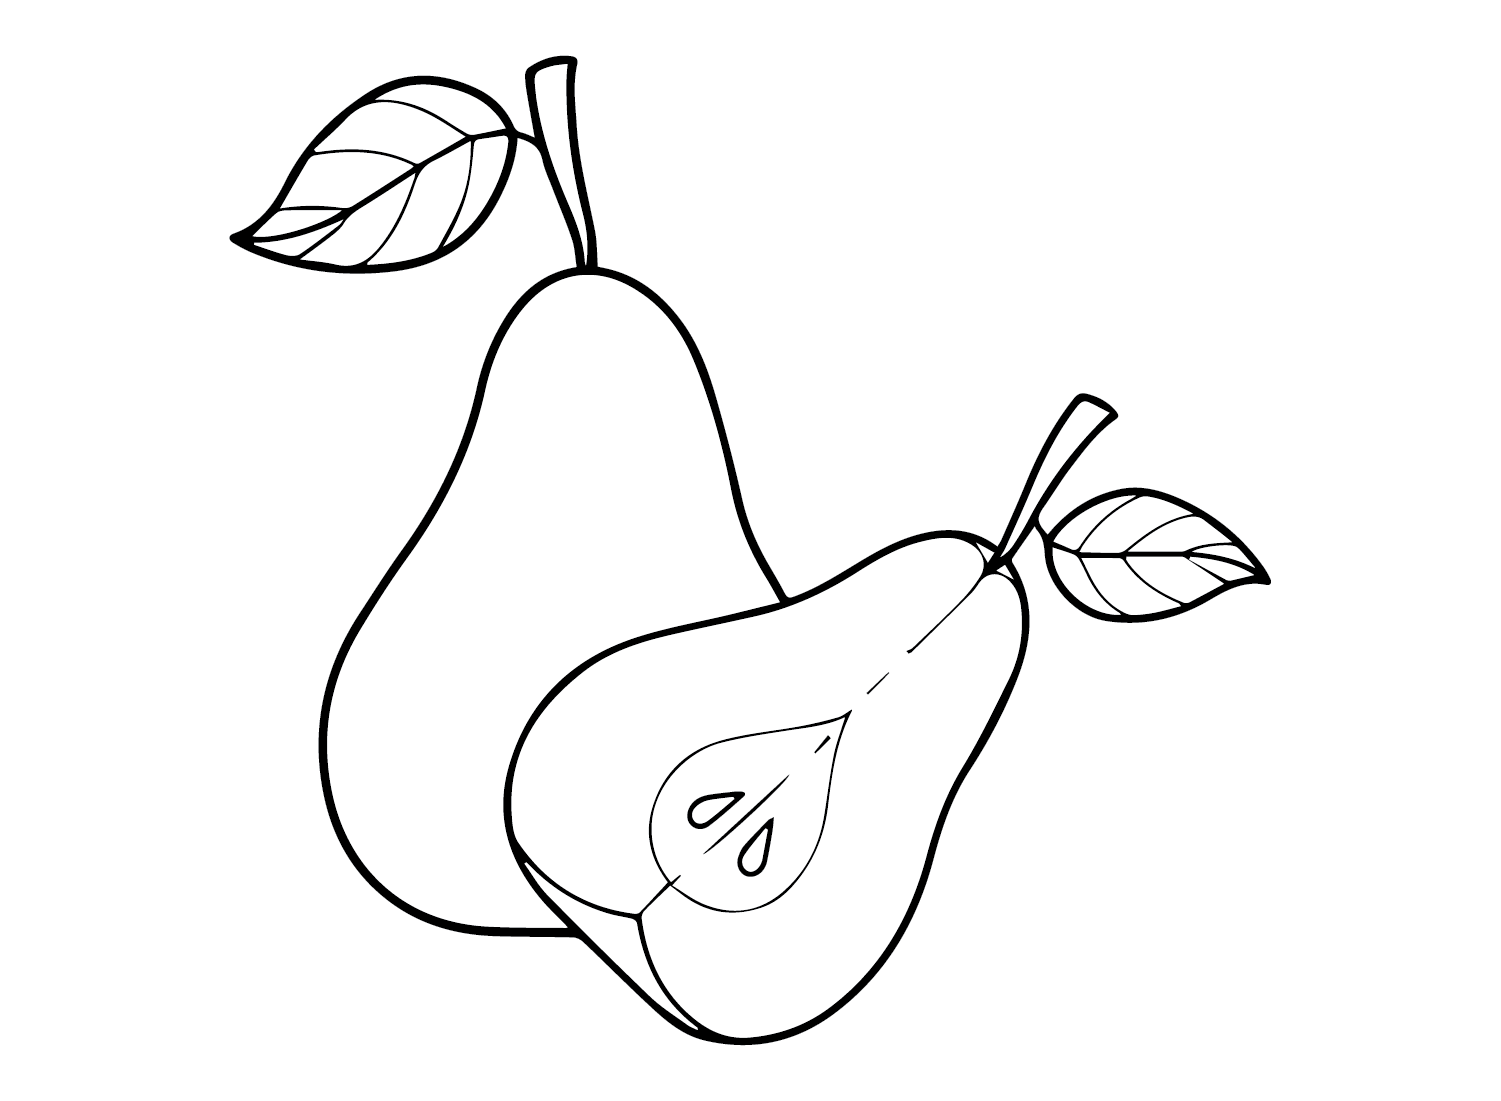 Pears for Kids Coloring Page